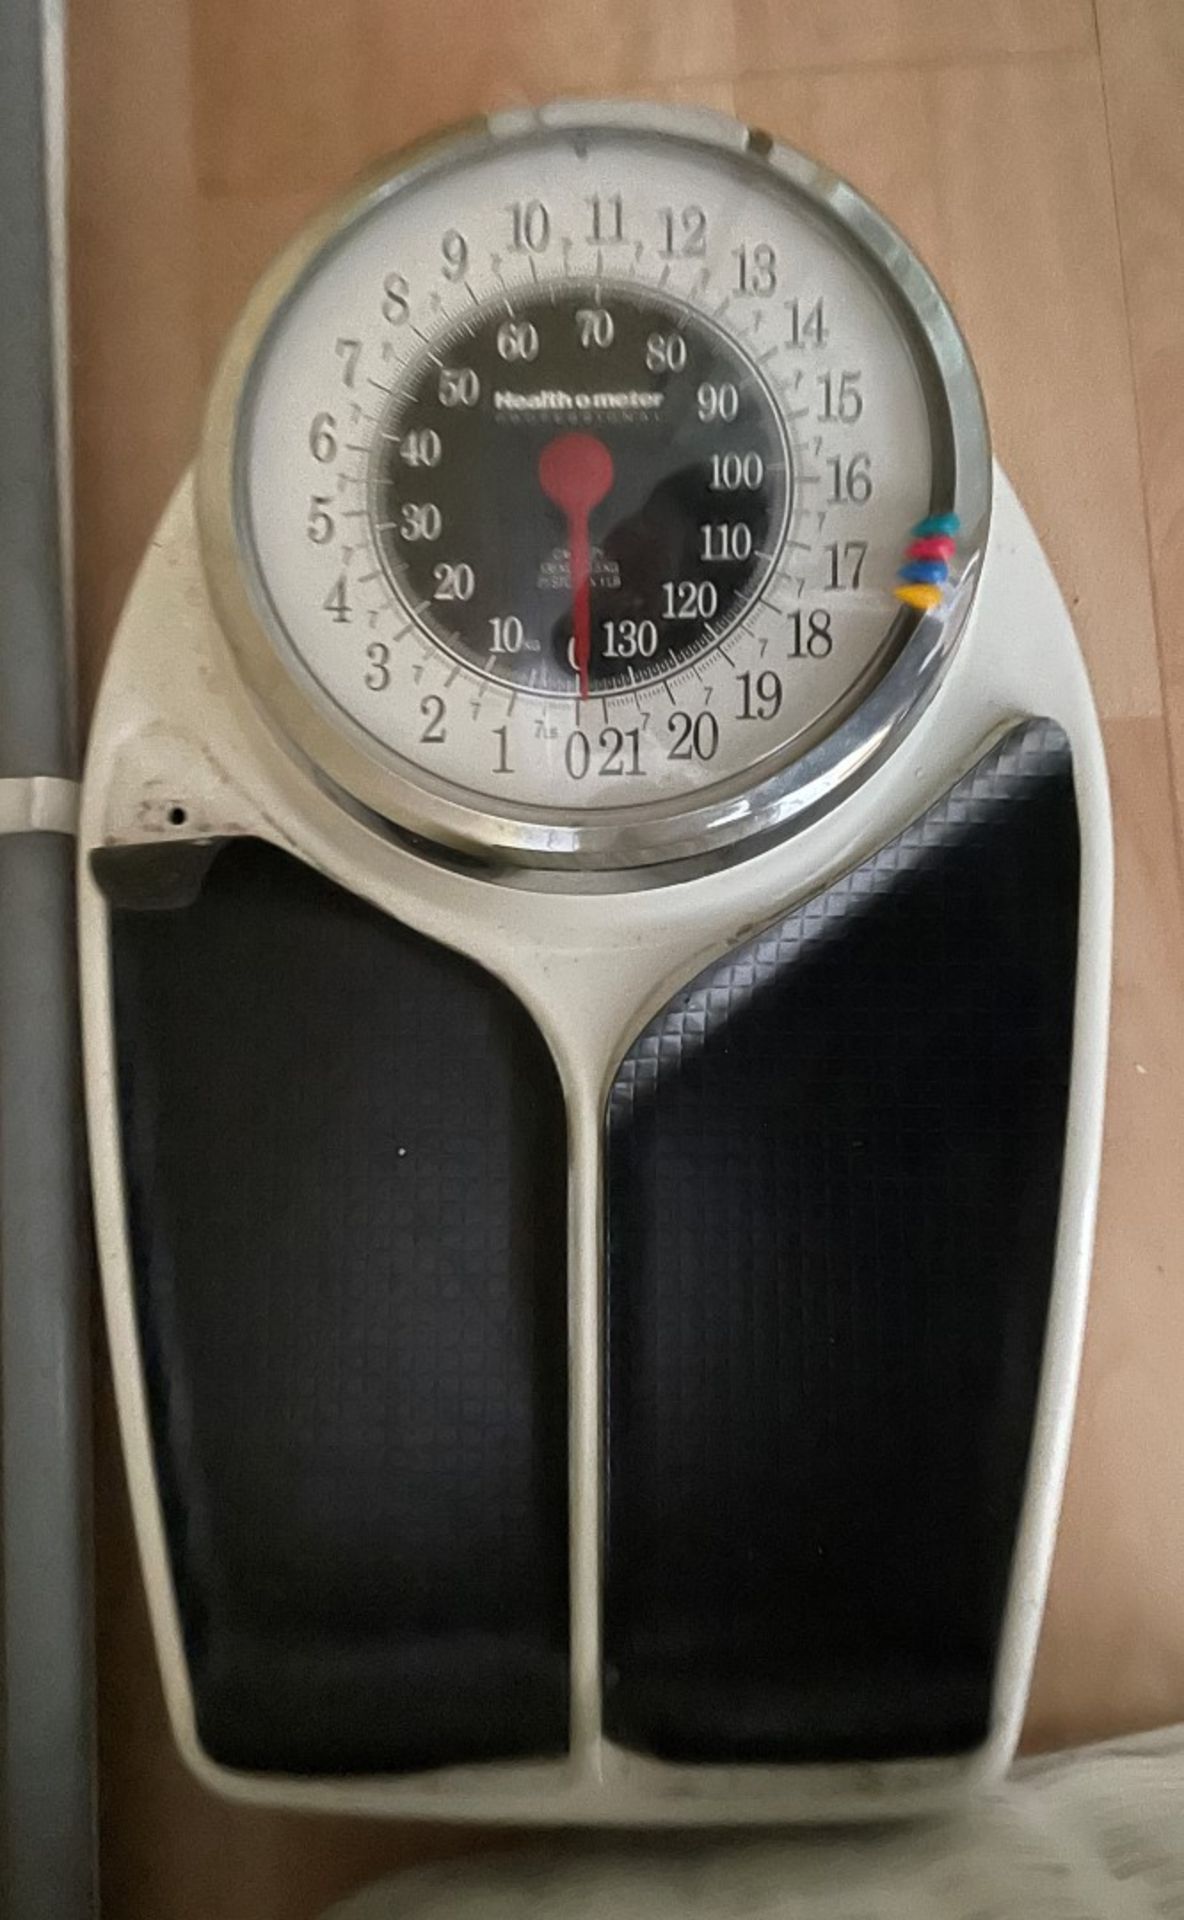 1 x Set Of Vintage Health-O-Meter Professional Scales - From An Exclusive Property In Leeds - No VAT - Image 2 of 3